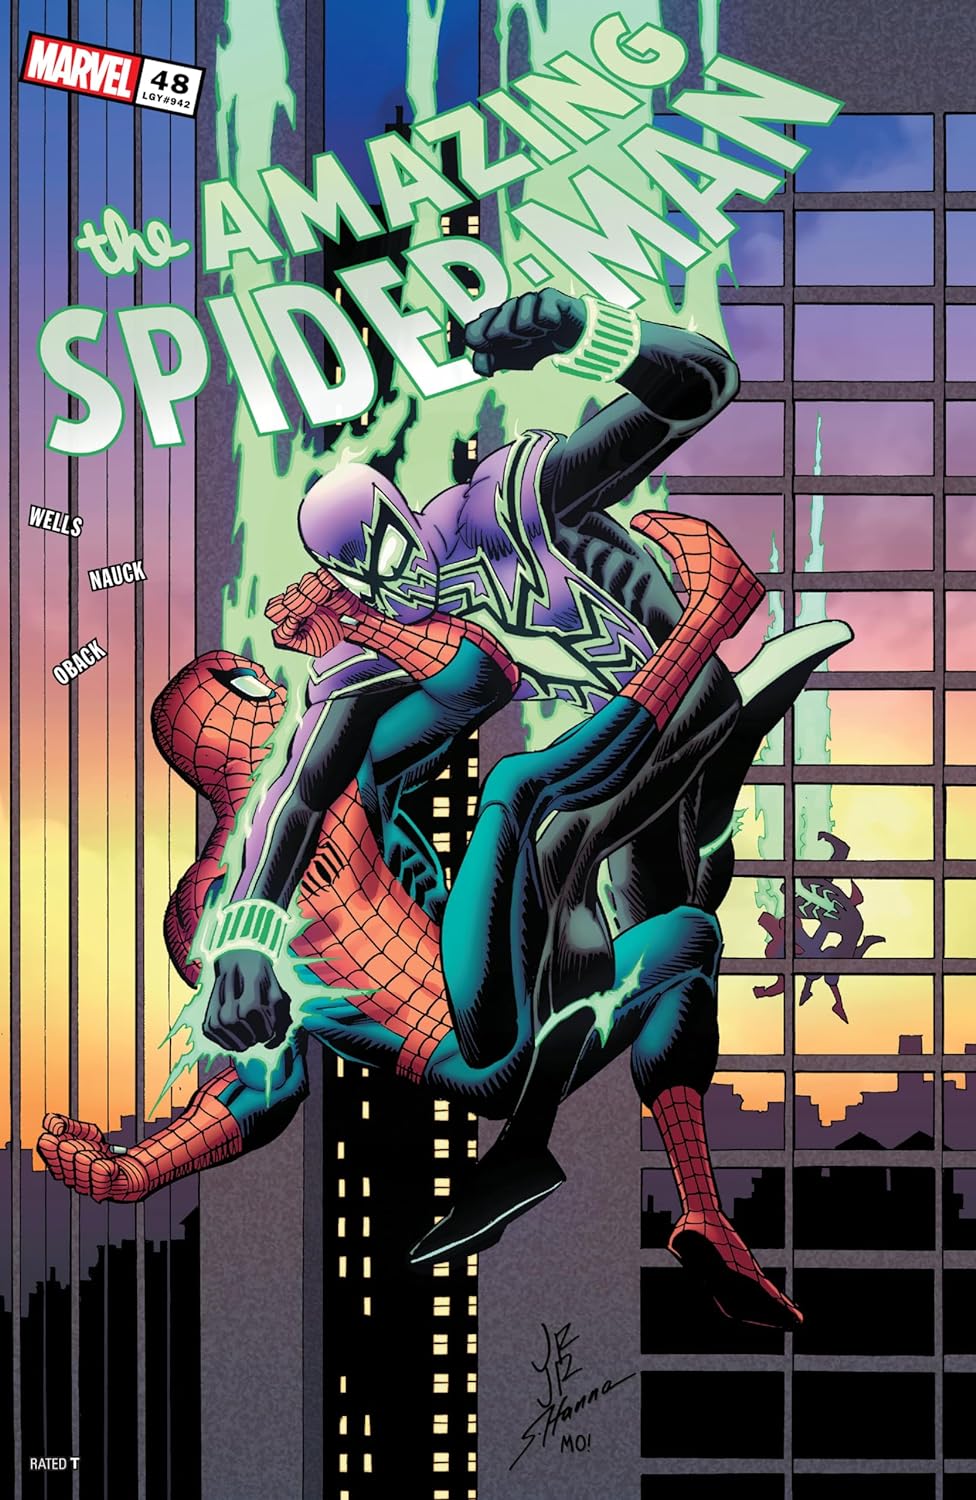 The Amazing Spider-Man #48 cover art